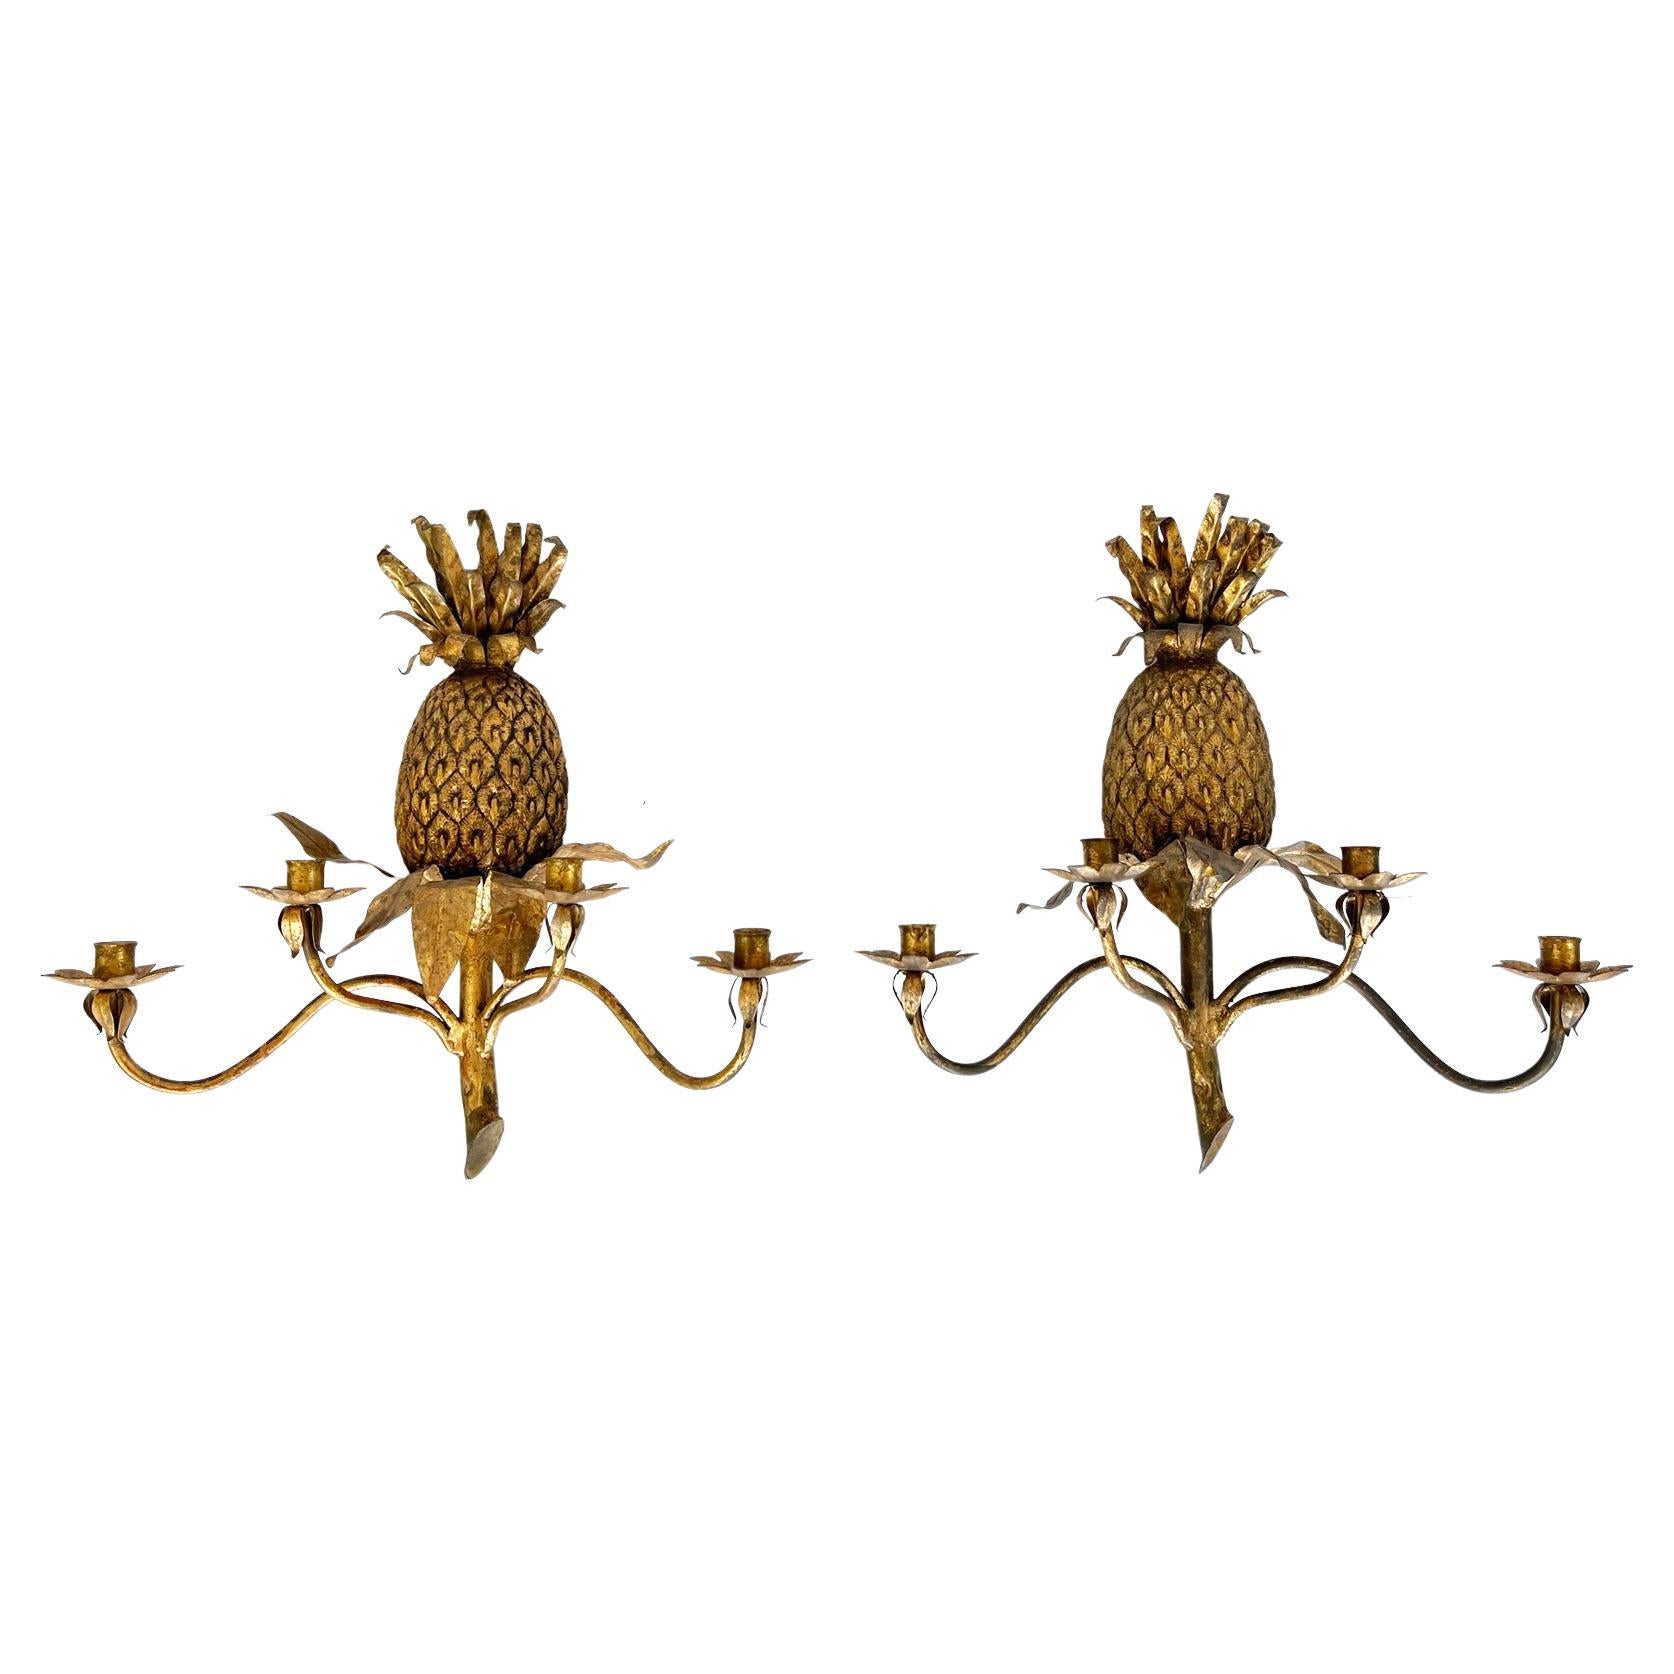 Pair of Vintage Gilded Iron Pineapple Form, Four-light Wall Sconces